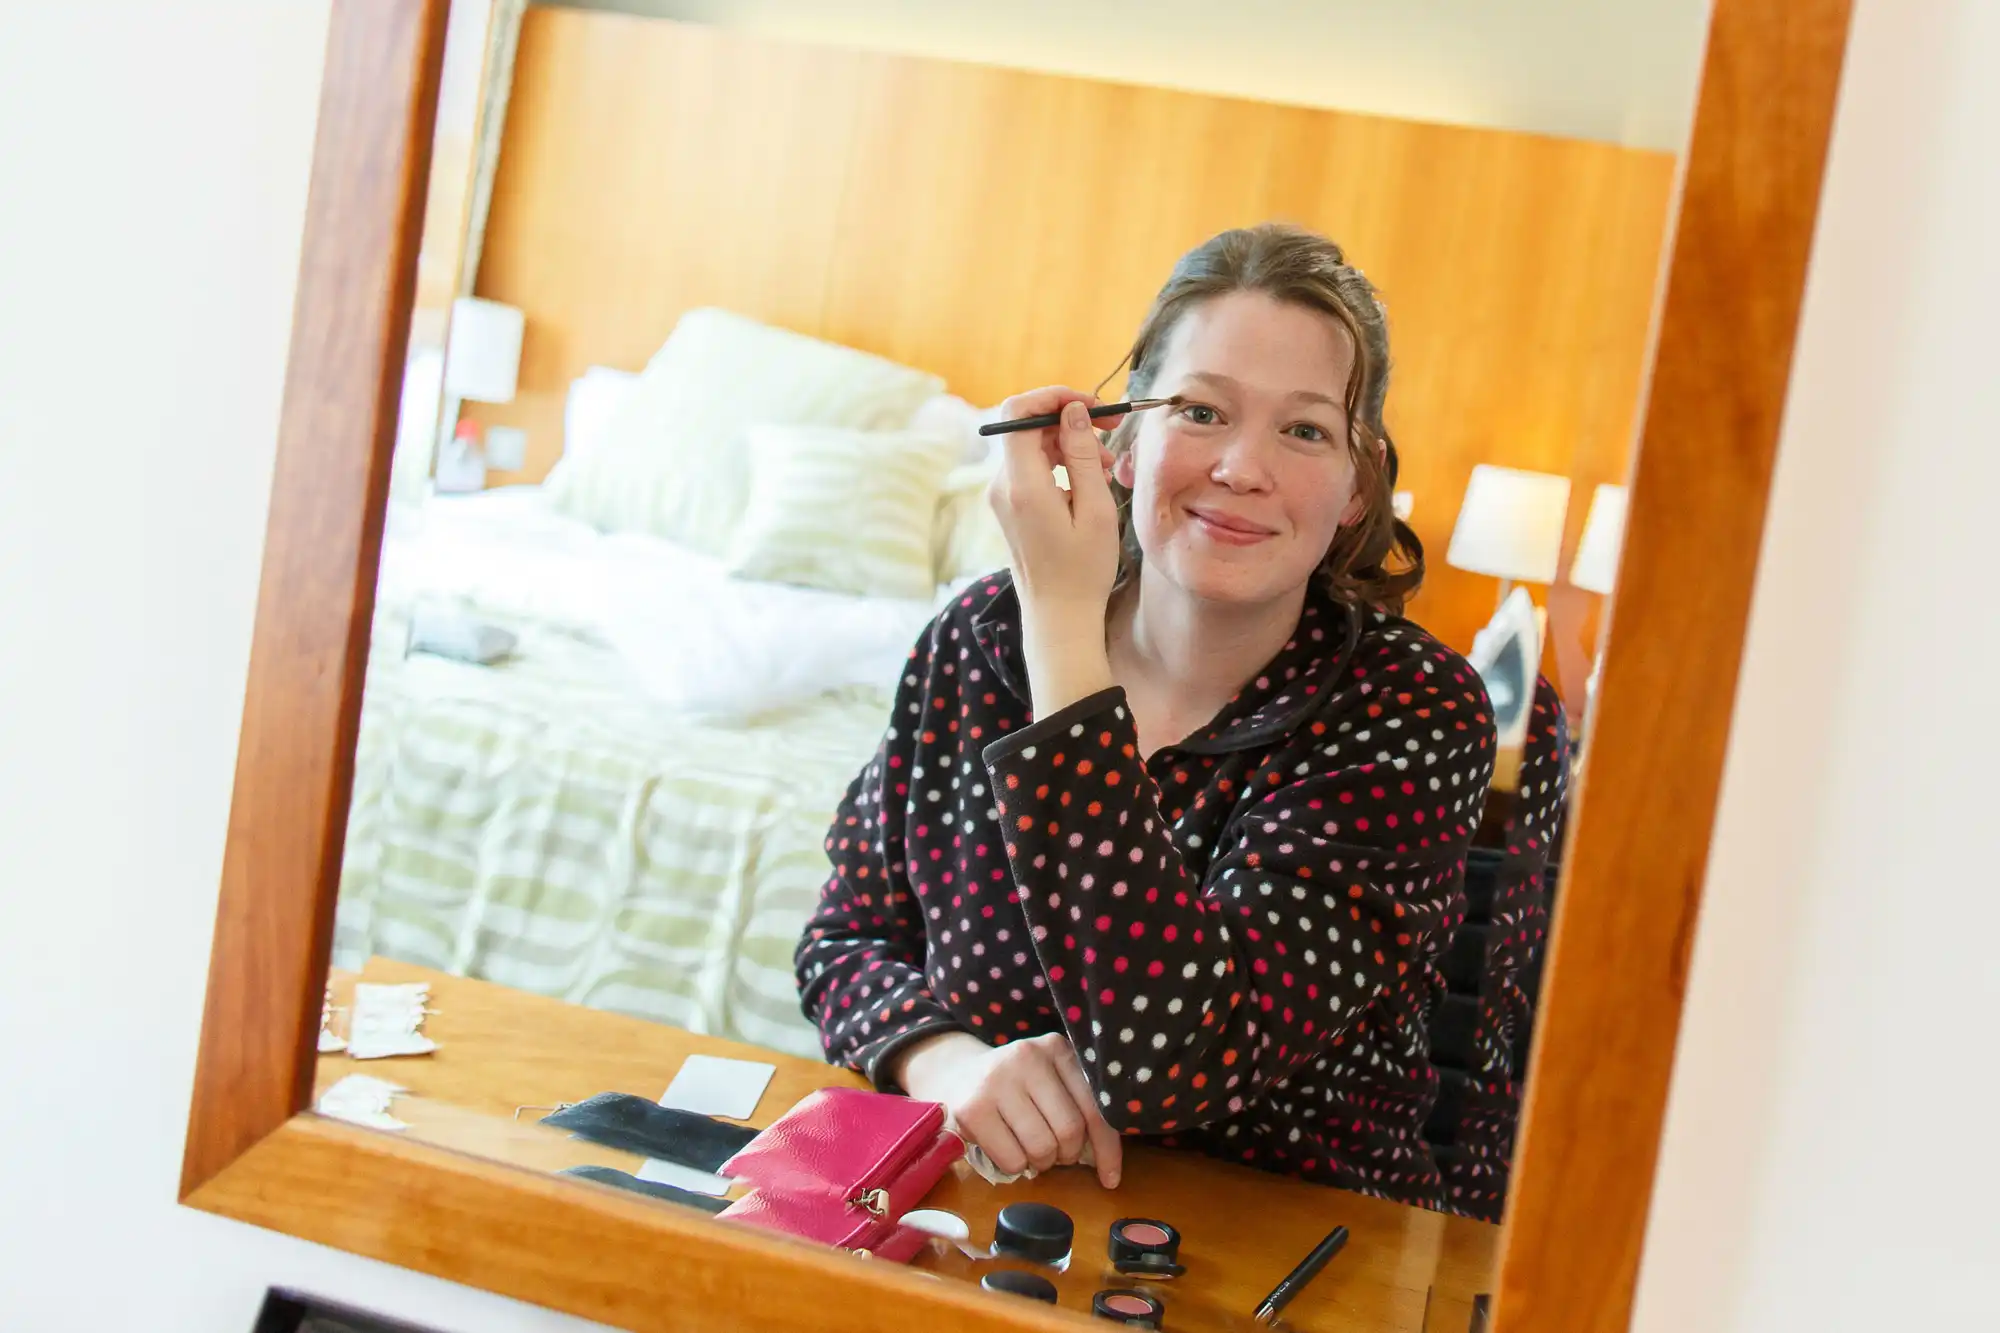 A woman applying makeup in front of a mirror, with a bed visible in the reflection.